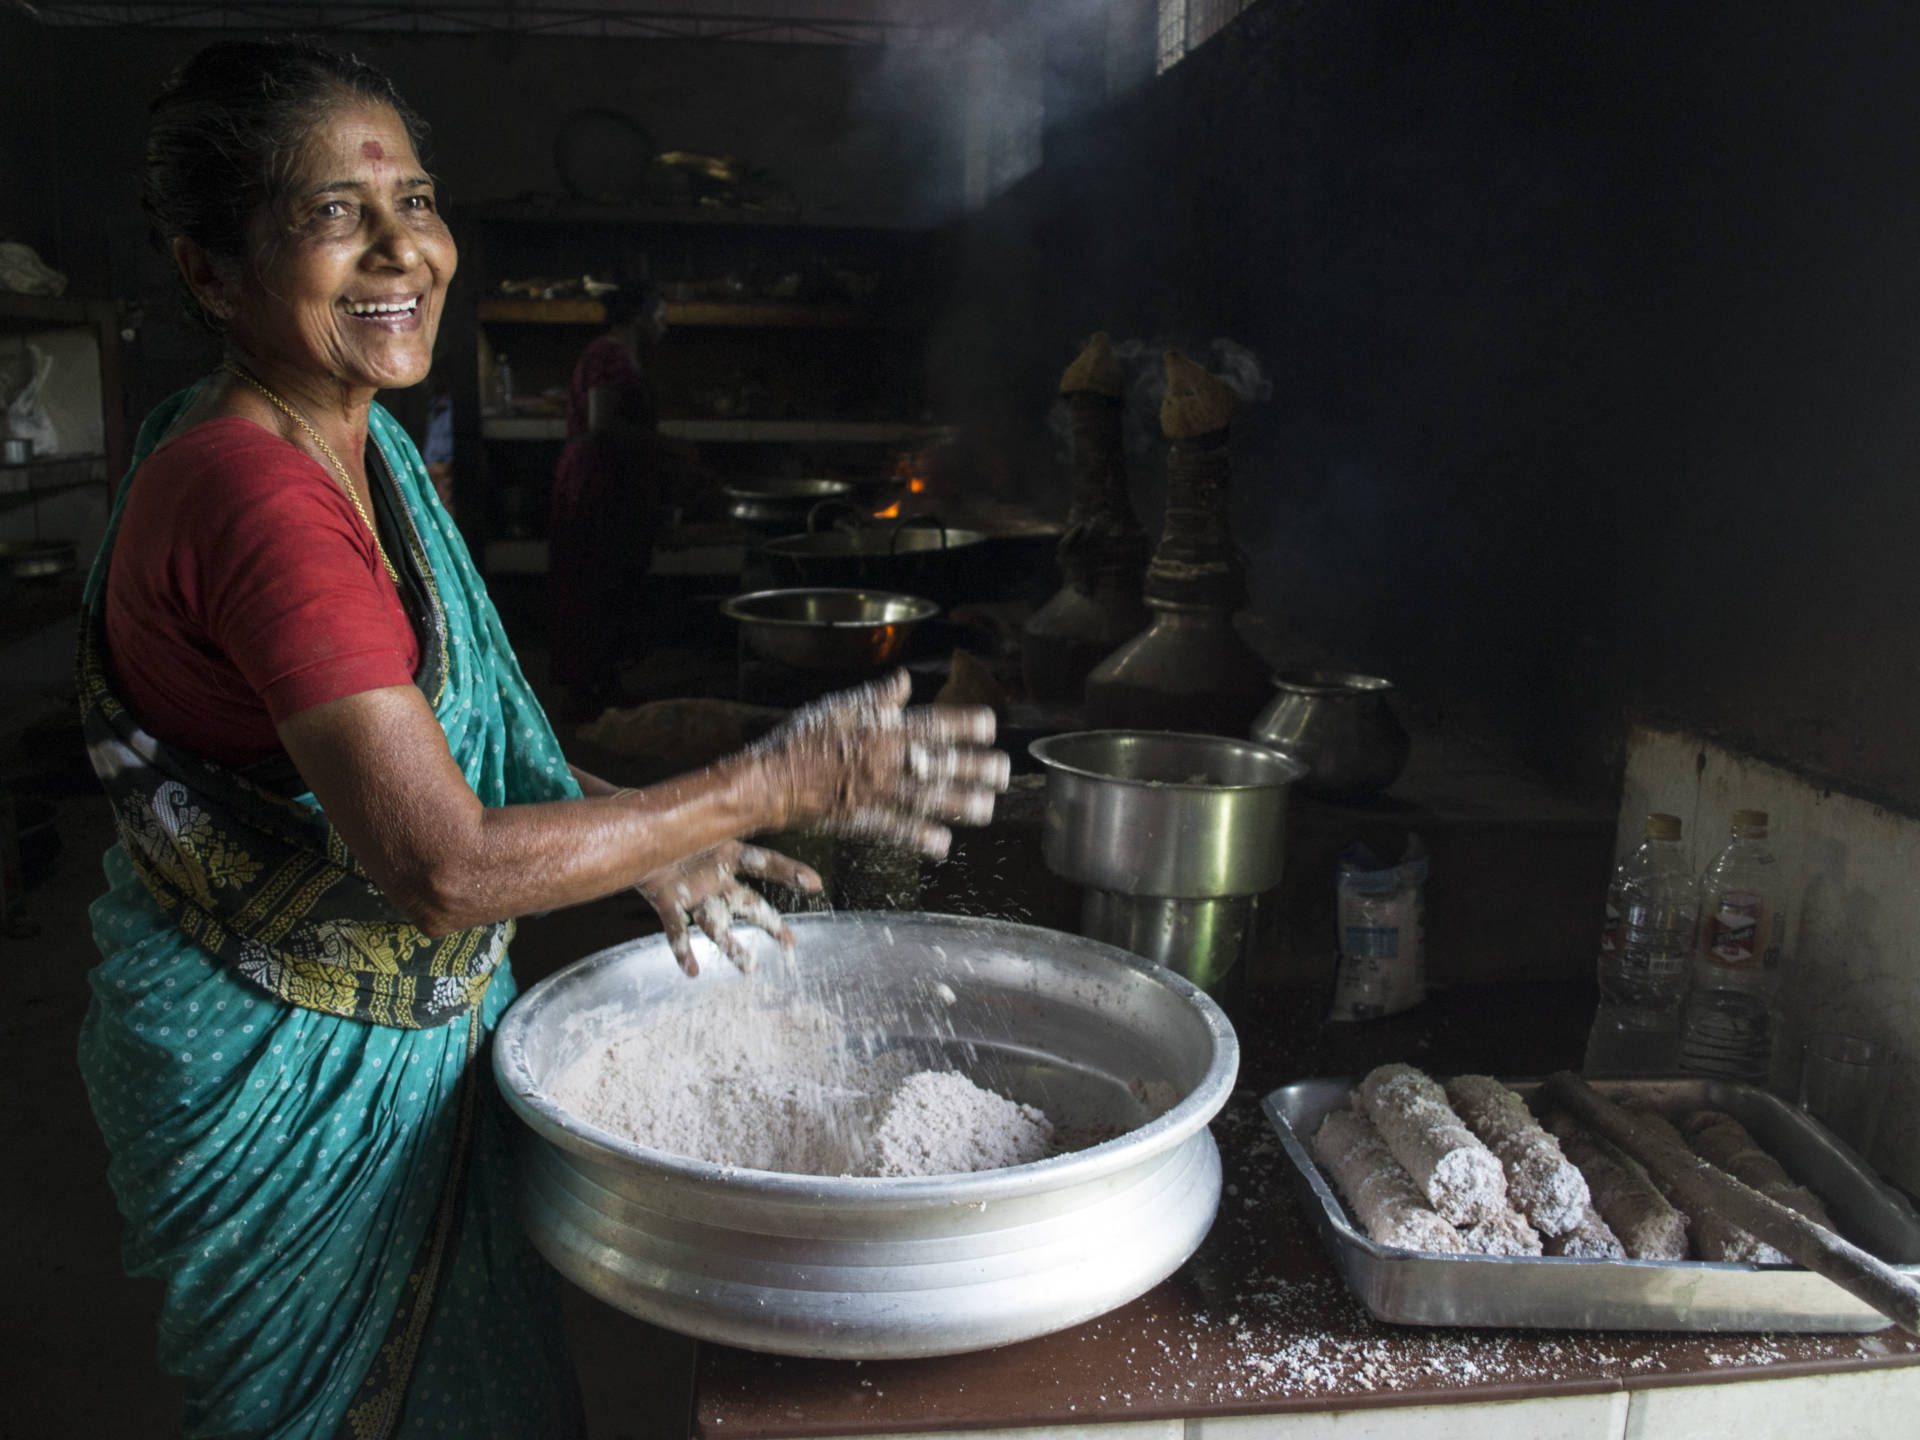 Radha CK has been working at Mullapanthal, one of the best-known toddy shops in Kerala, for three decades.